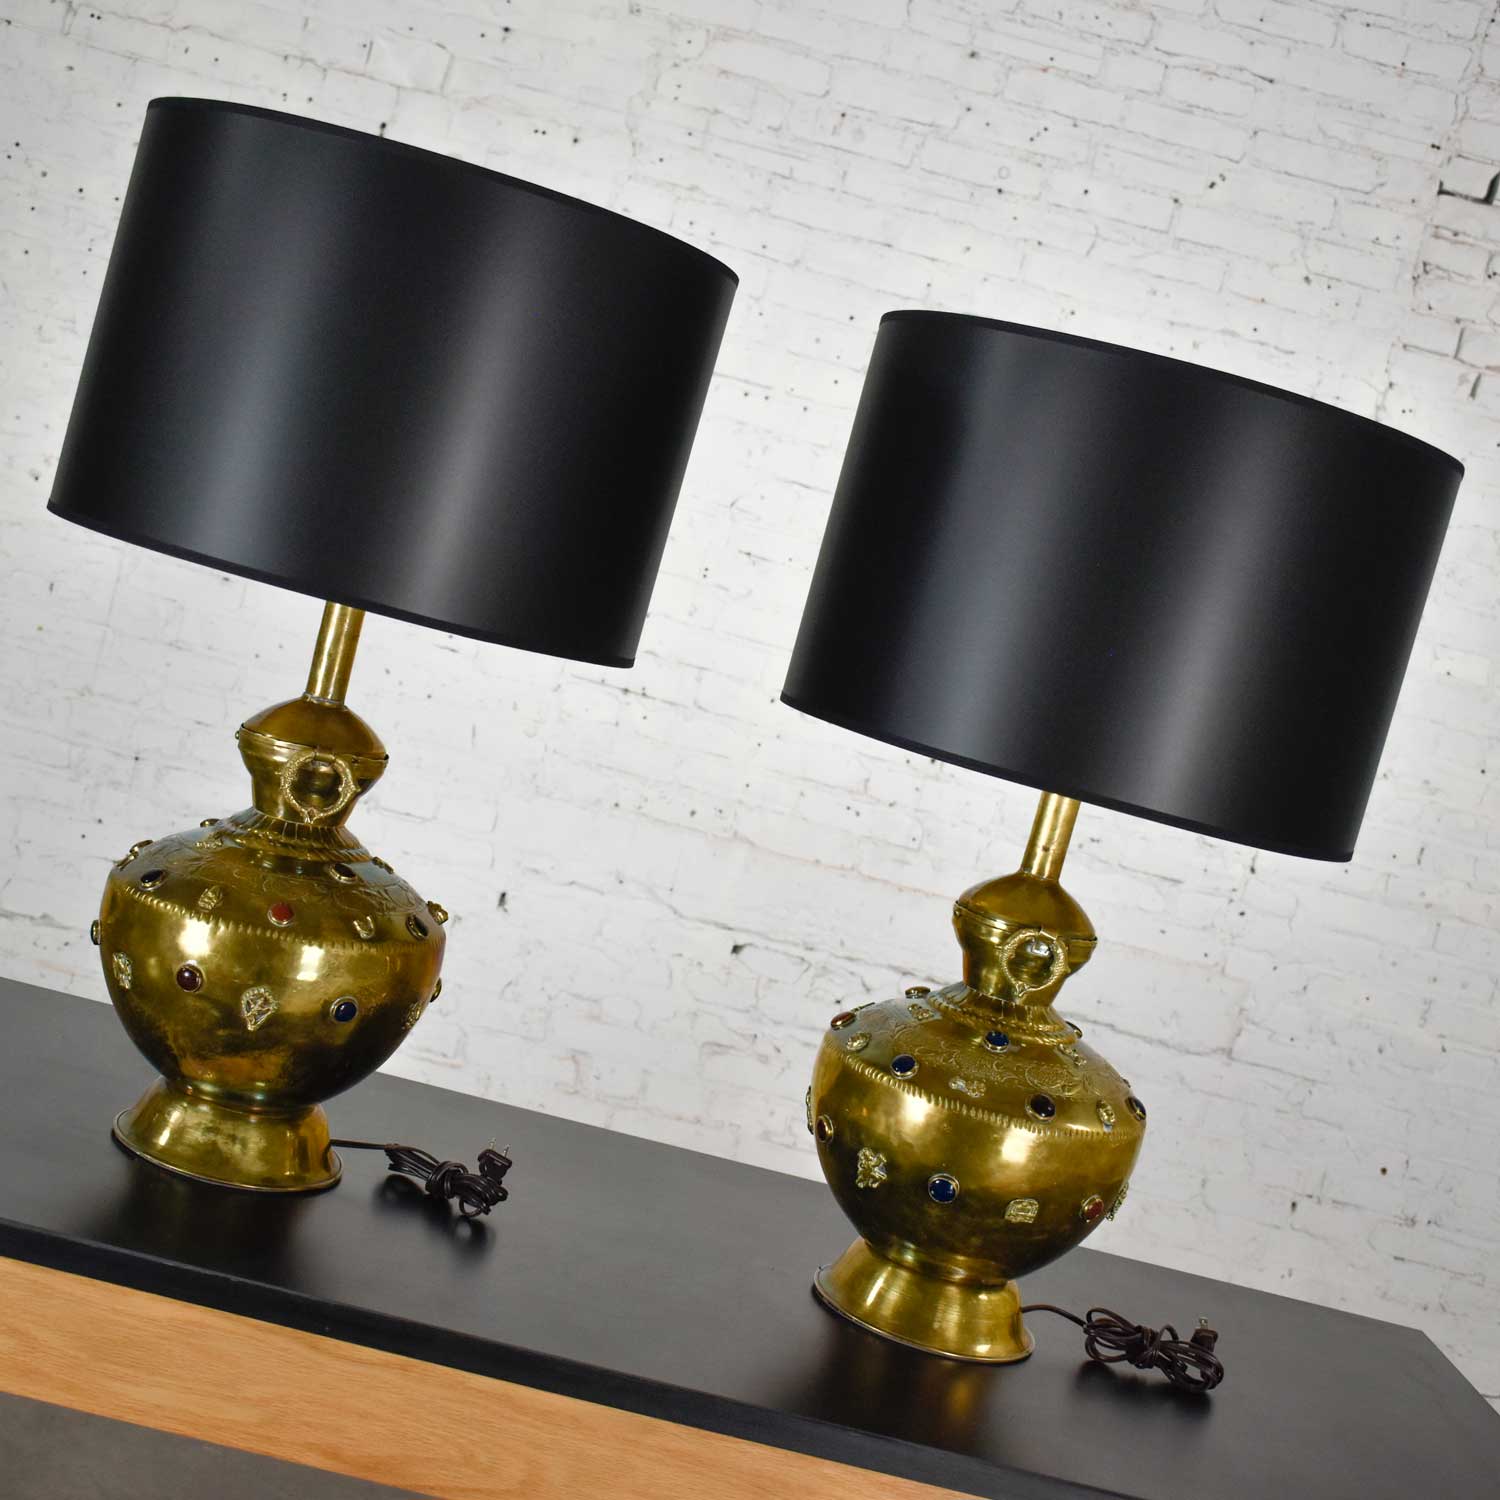 Pair of Tibetan Hand Hammered Brass Lamps with Glass Jewels